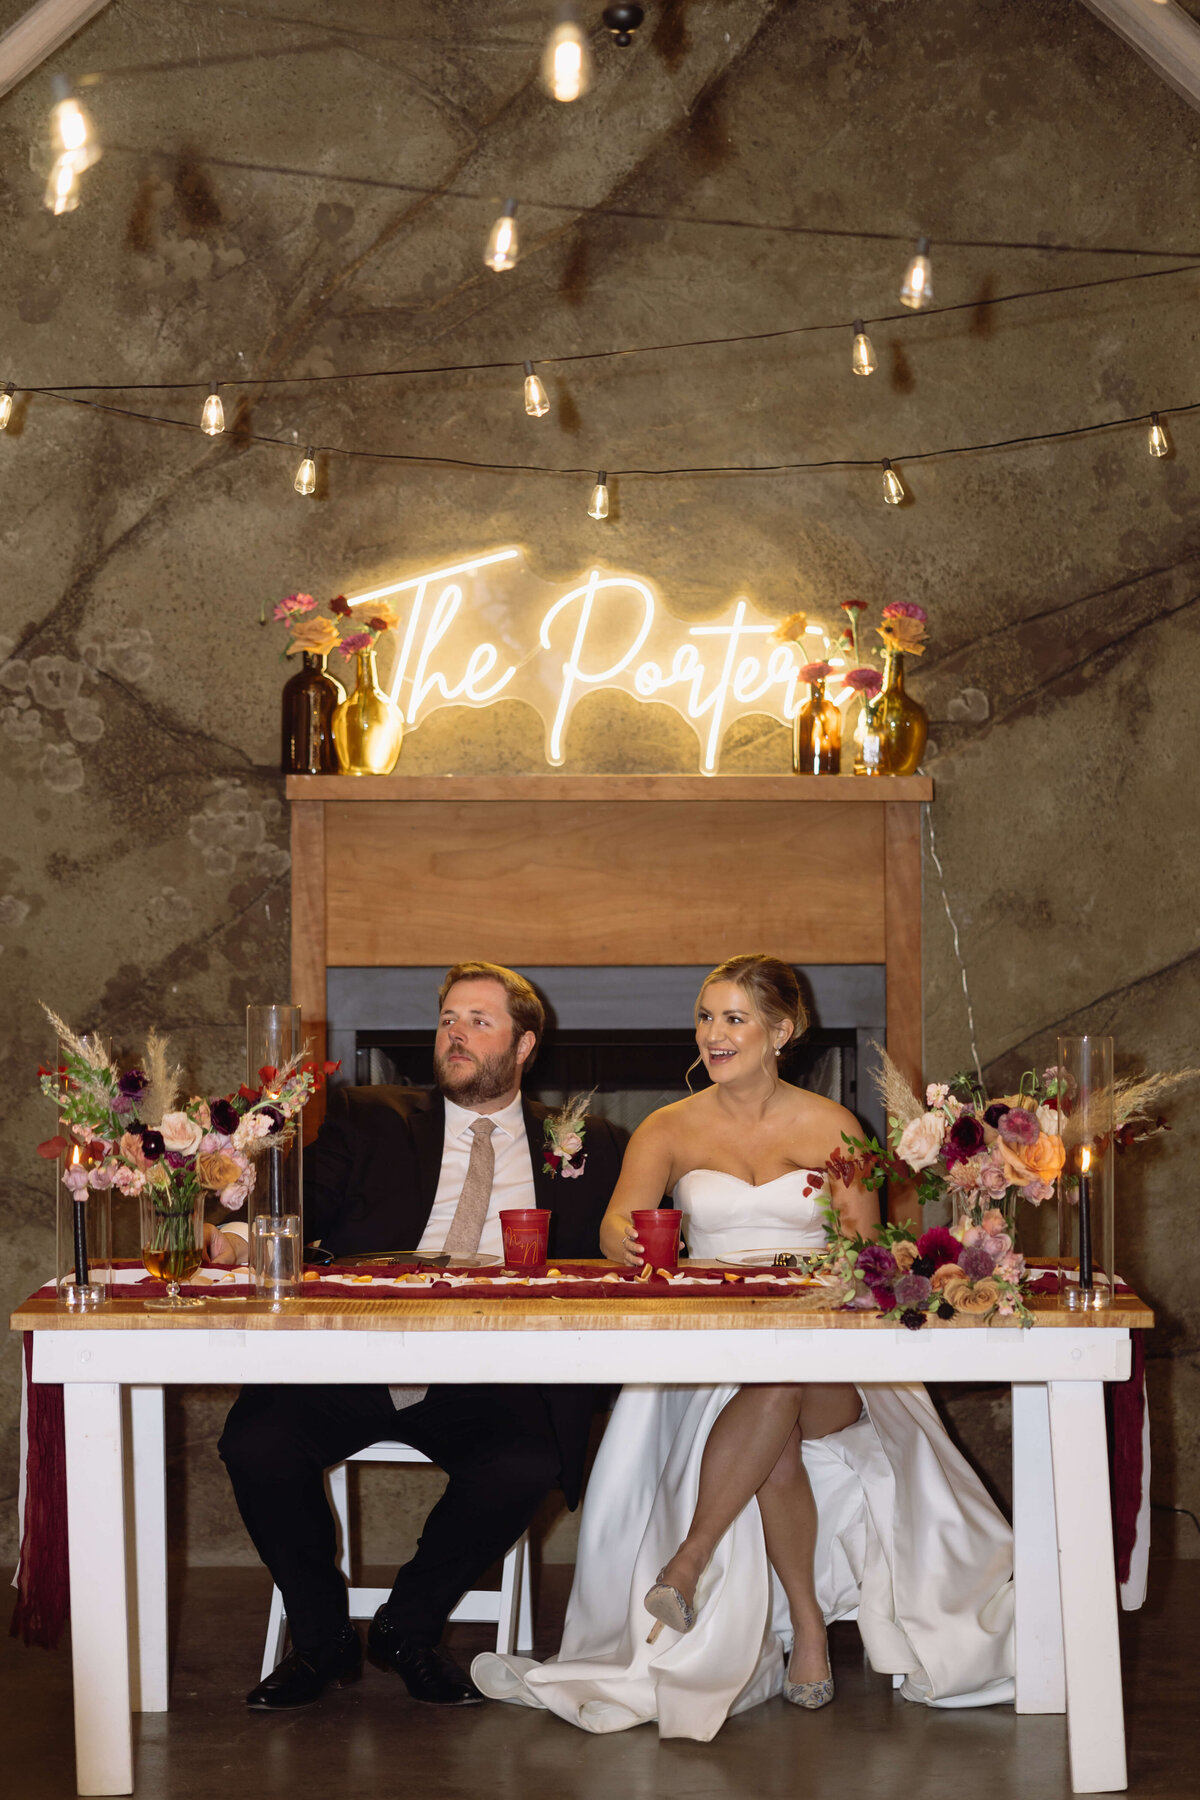 wedding reception with bride adn groom sitting at their wedding table that is decorated with florals and red table runner with their last name in a light sign above a mantle behind them